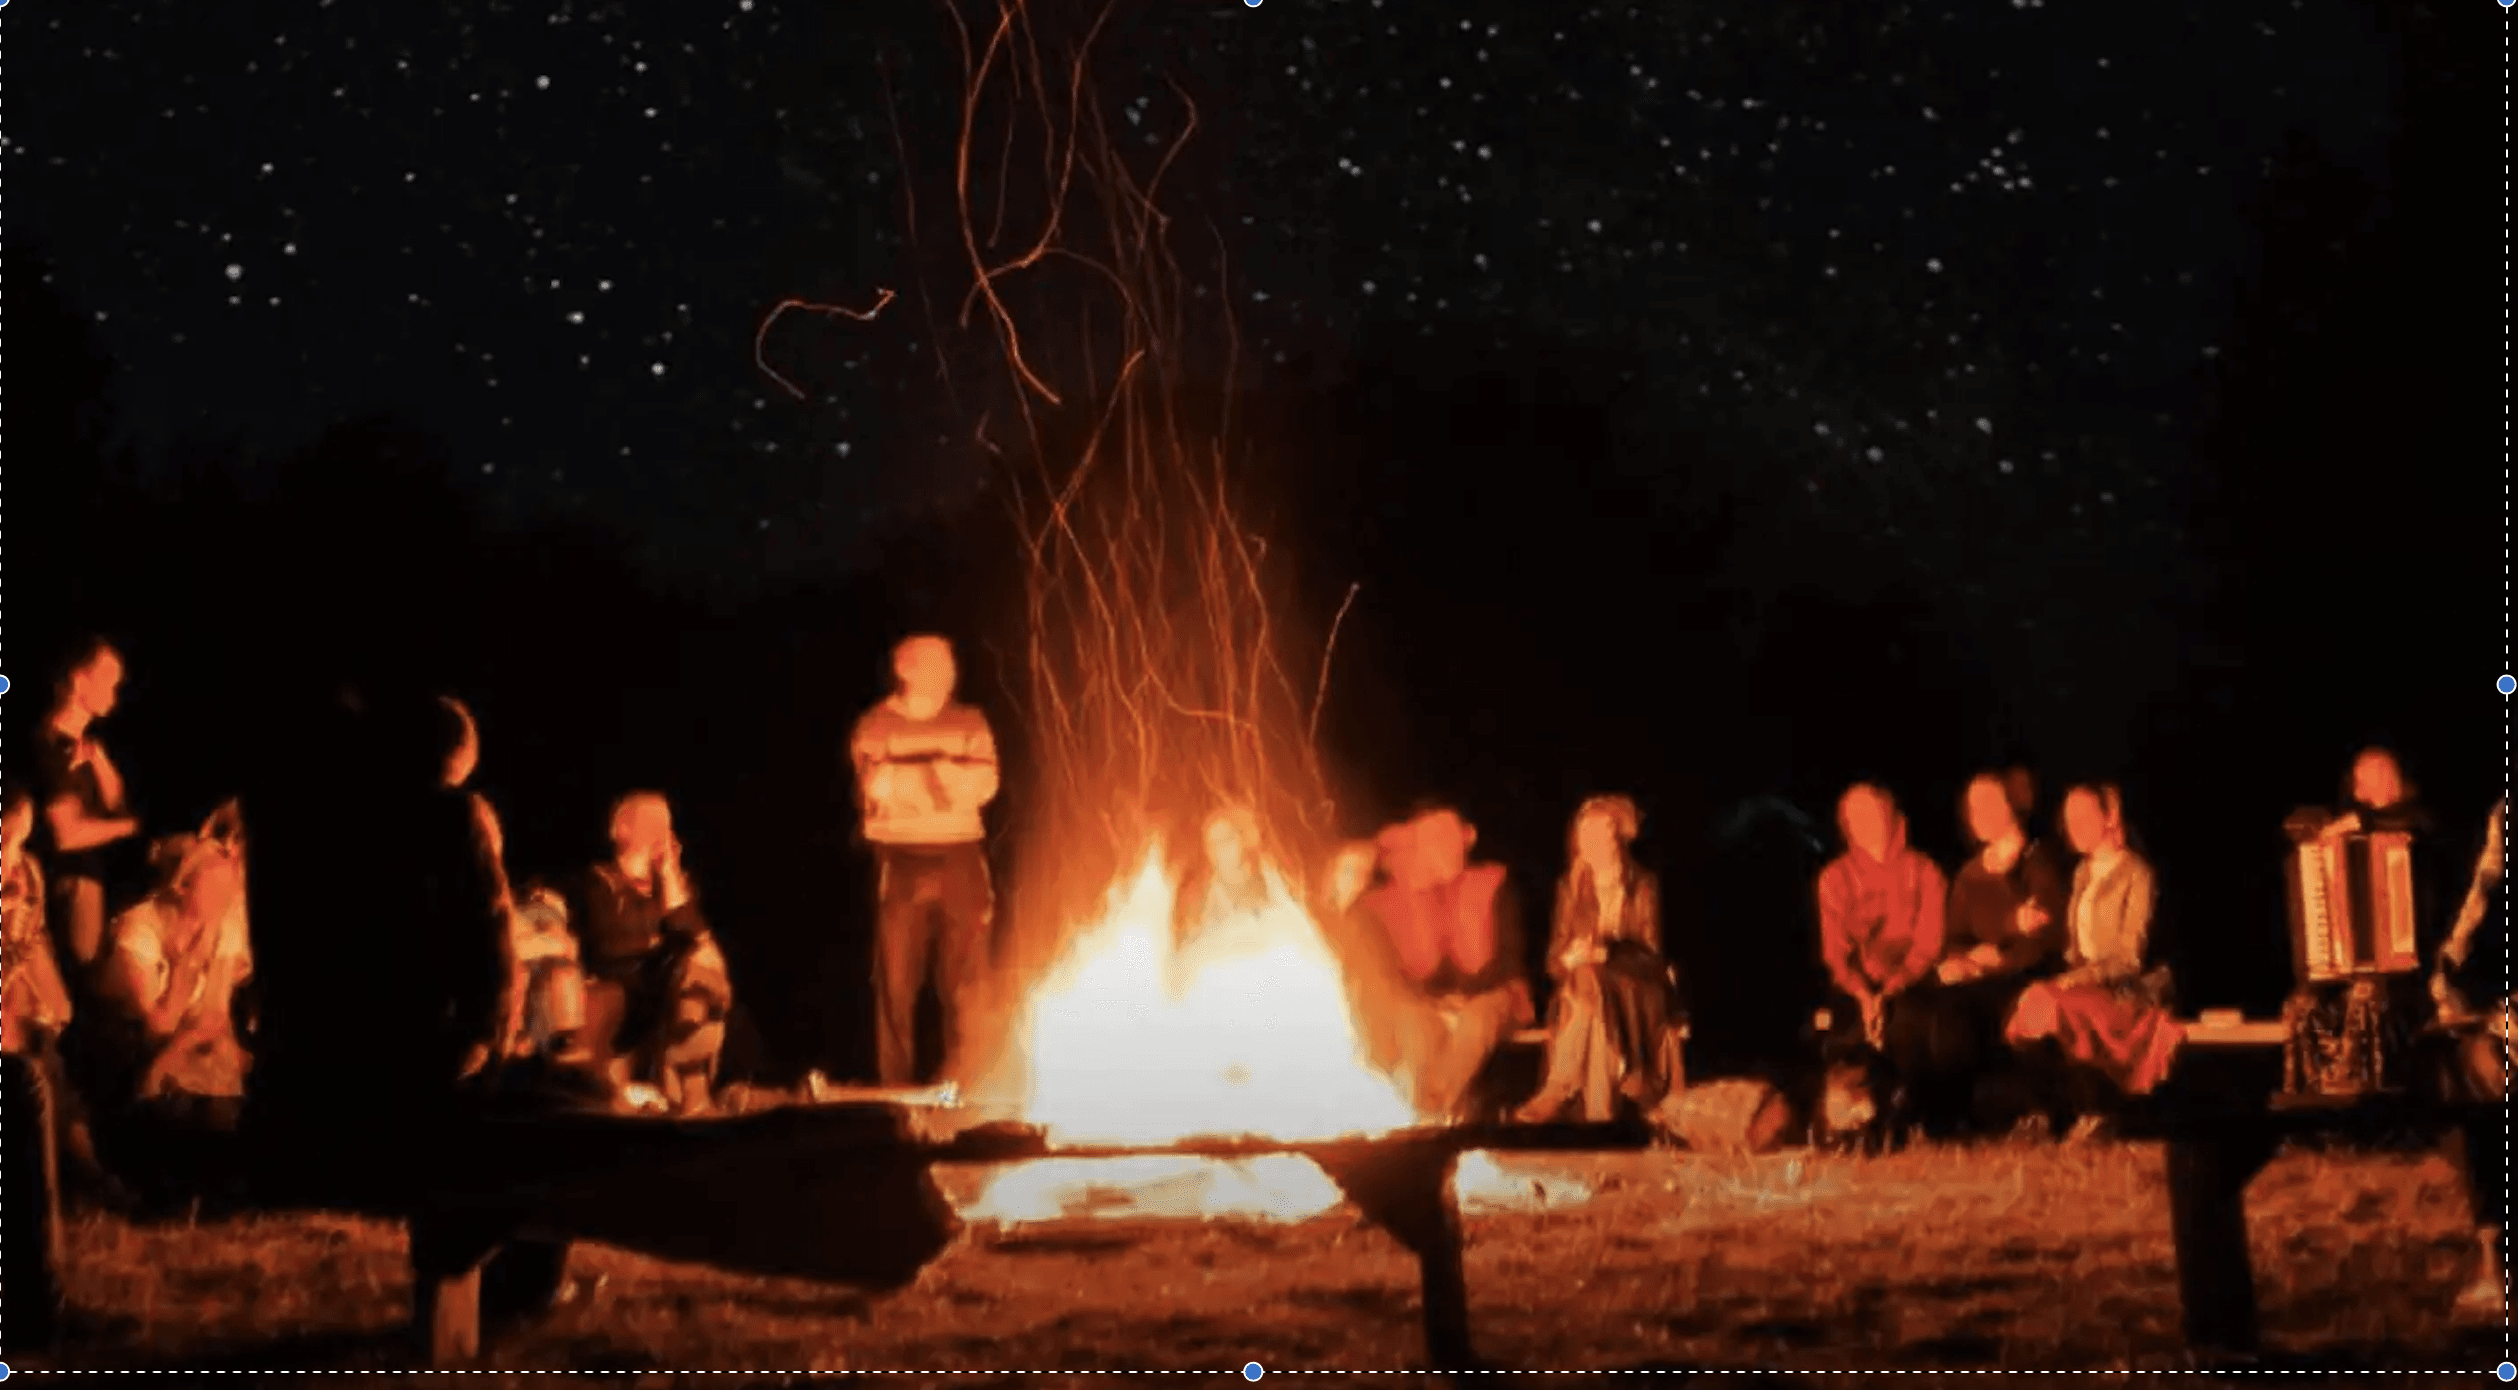 Bonfire and Fall activities